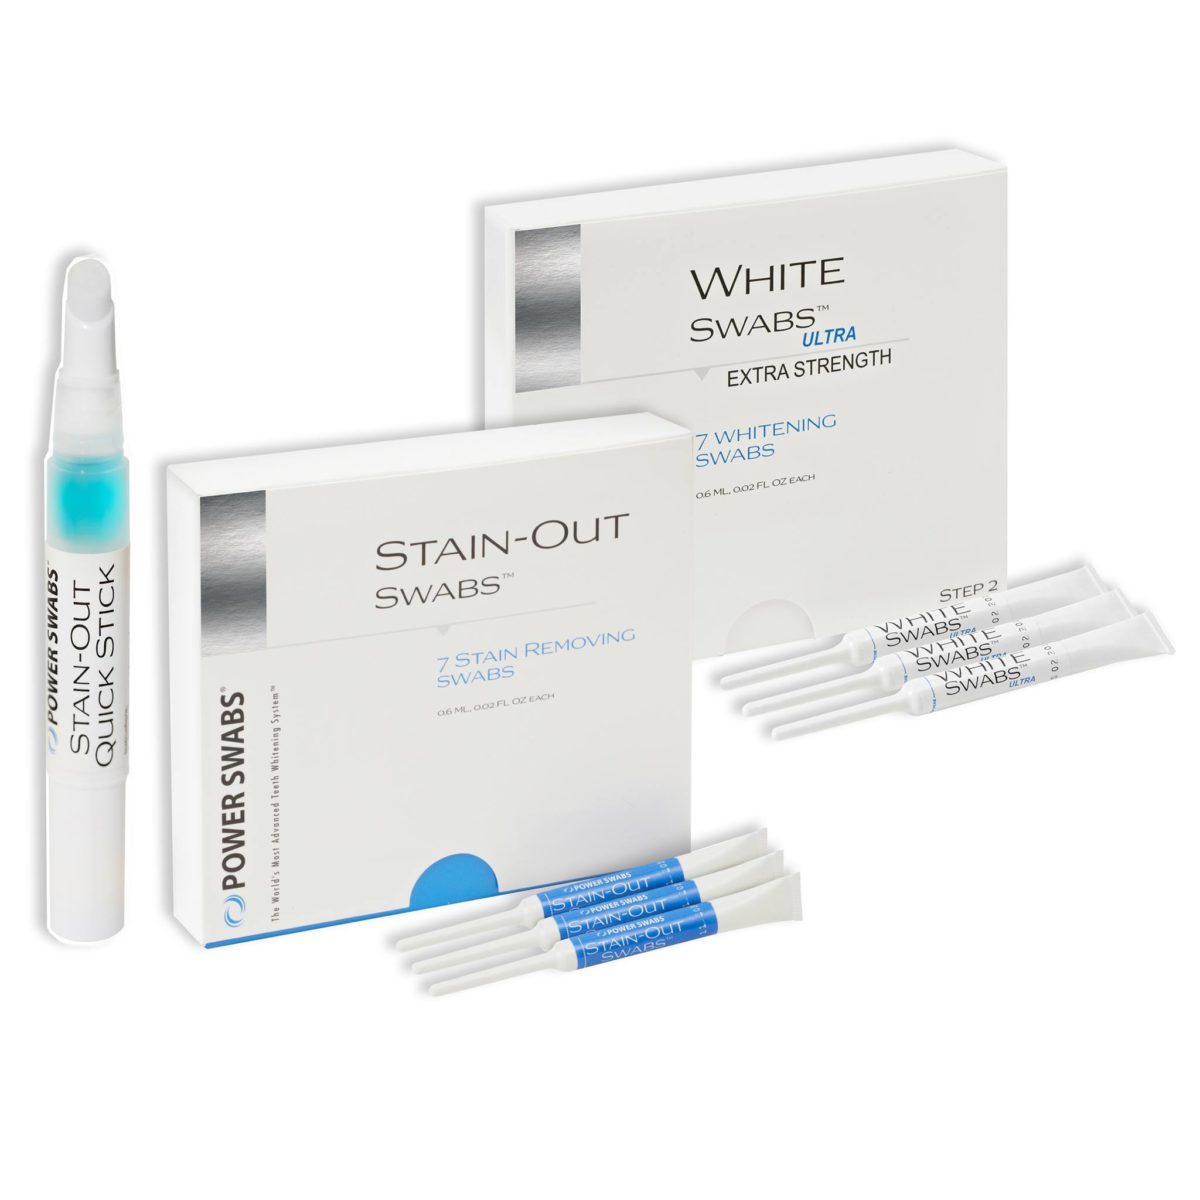 Power Swabs Teeth Whitening Review Must Read This Before Buying